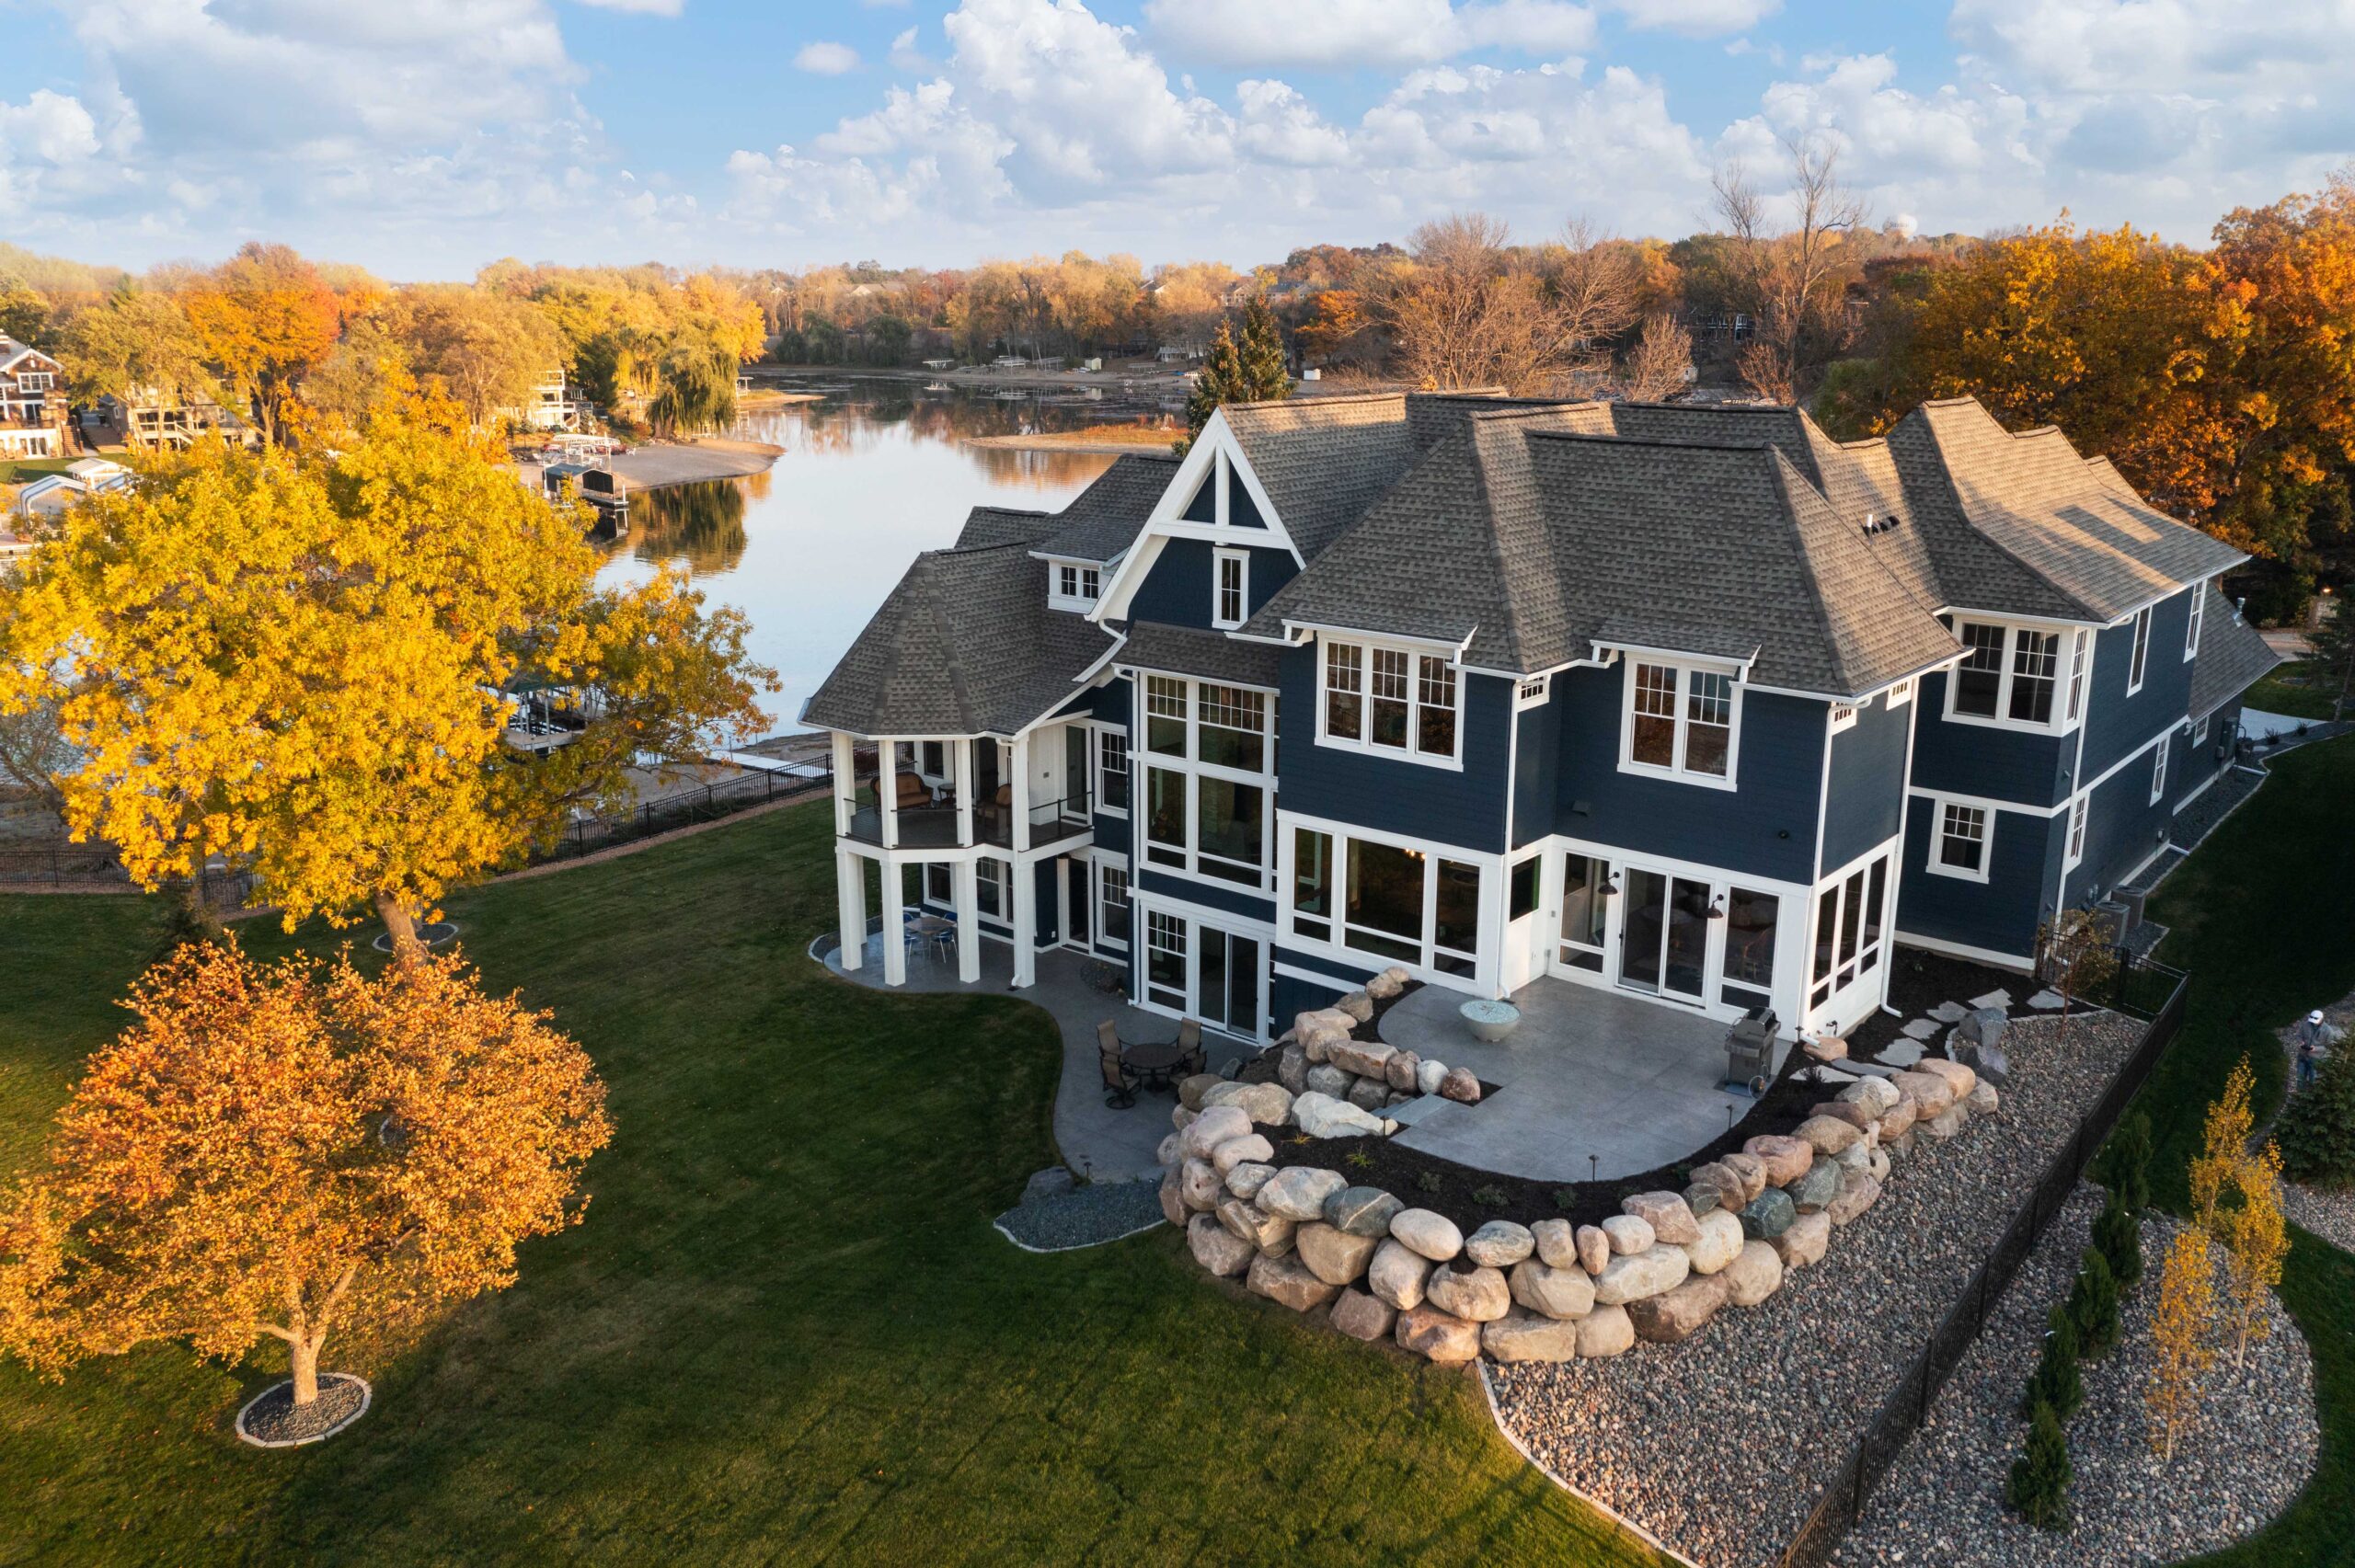 An aerial view of a modern home with a lake in the background.